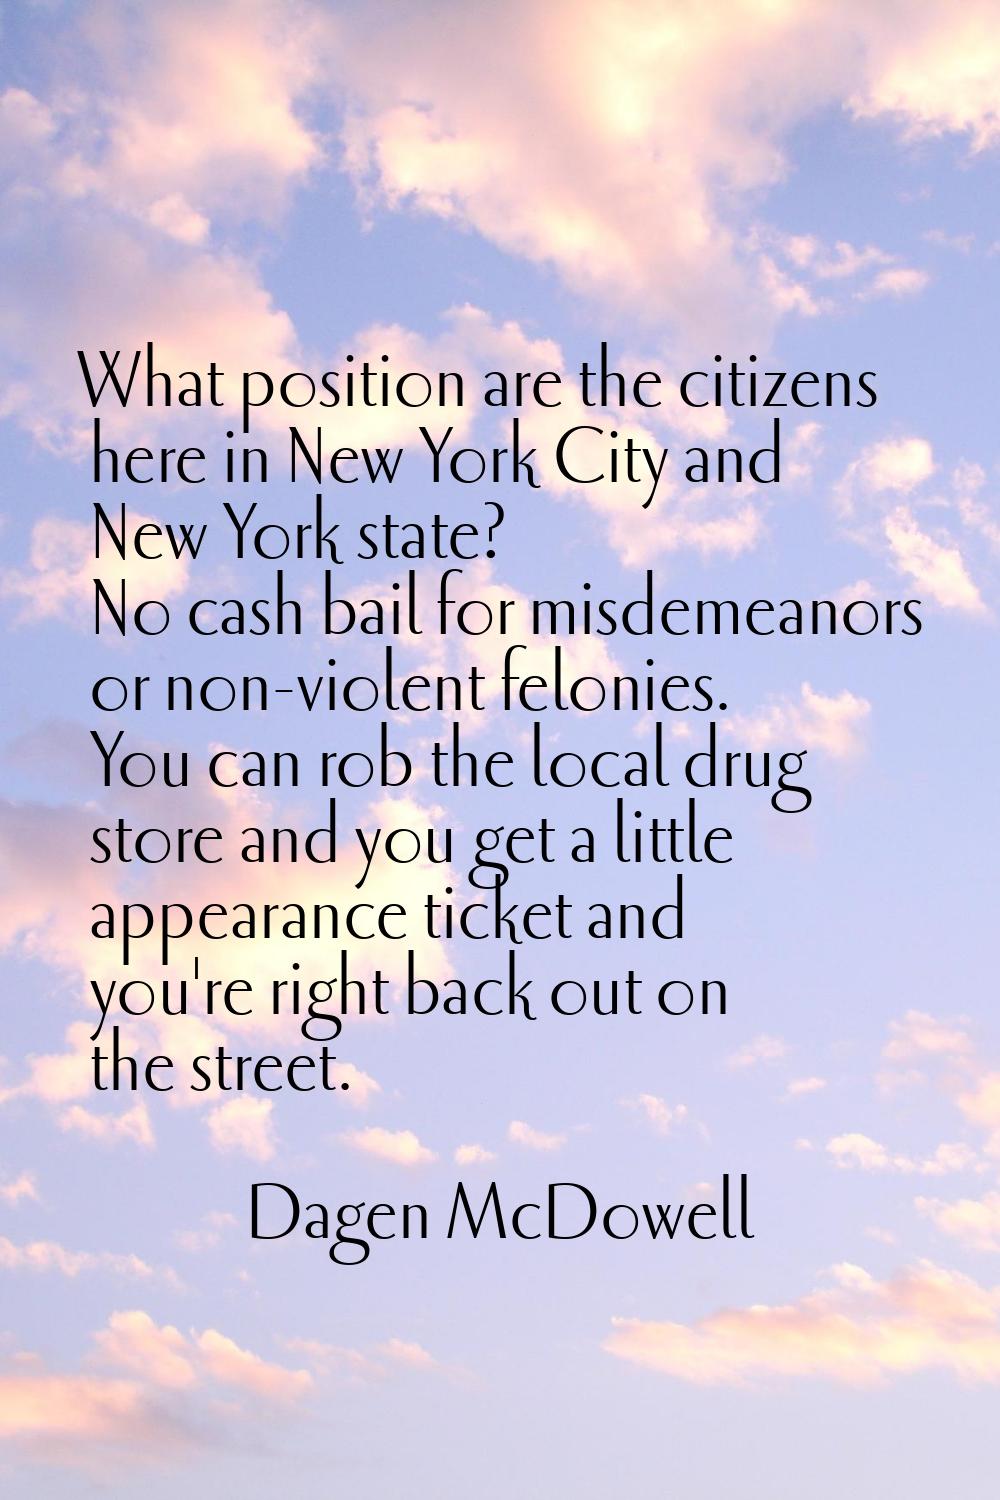 What position are the citizens here in New York City and New York state? No cash bail for misdemean